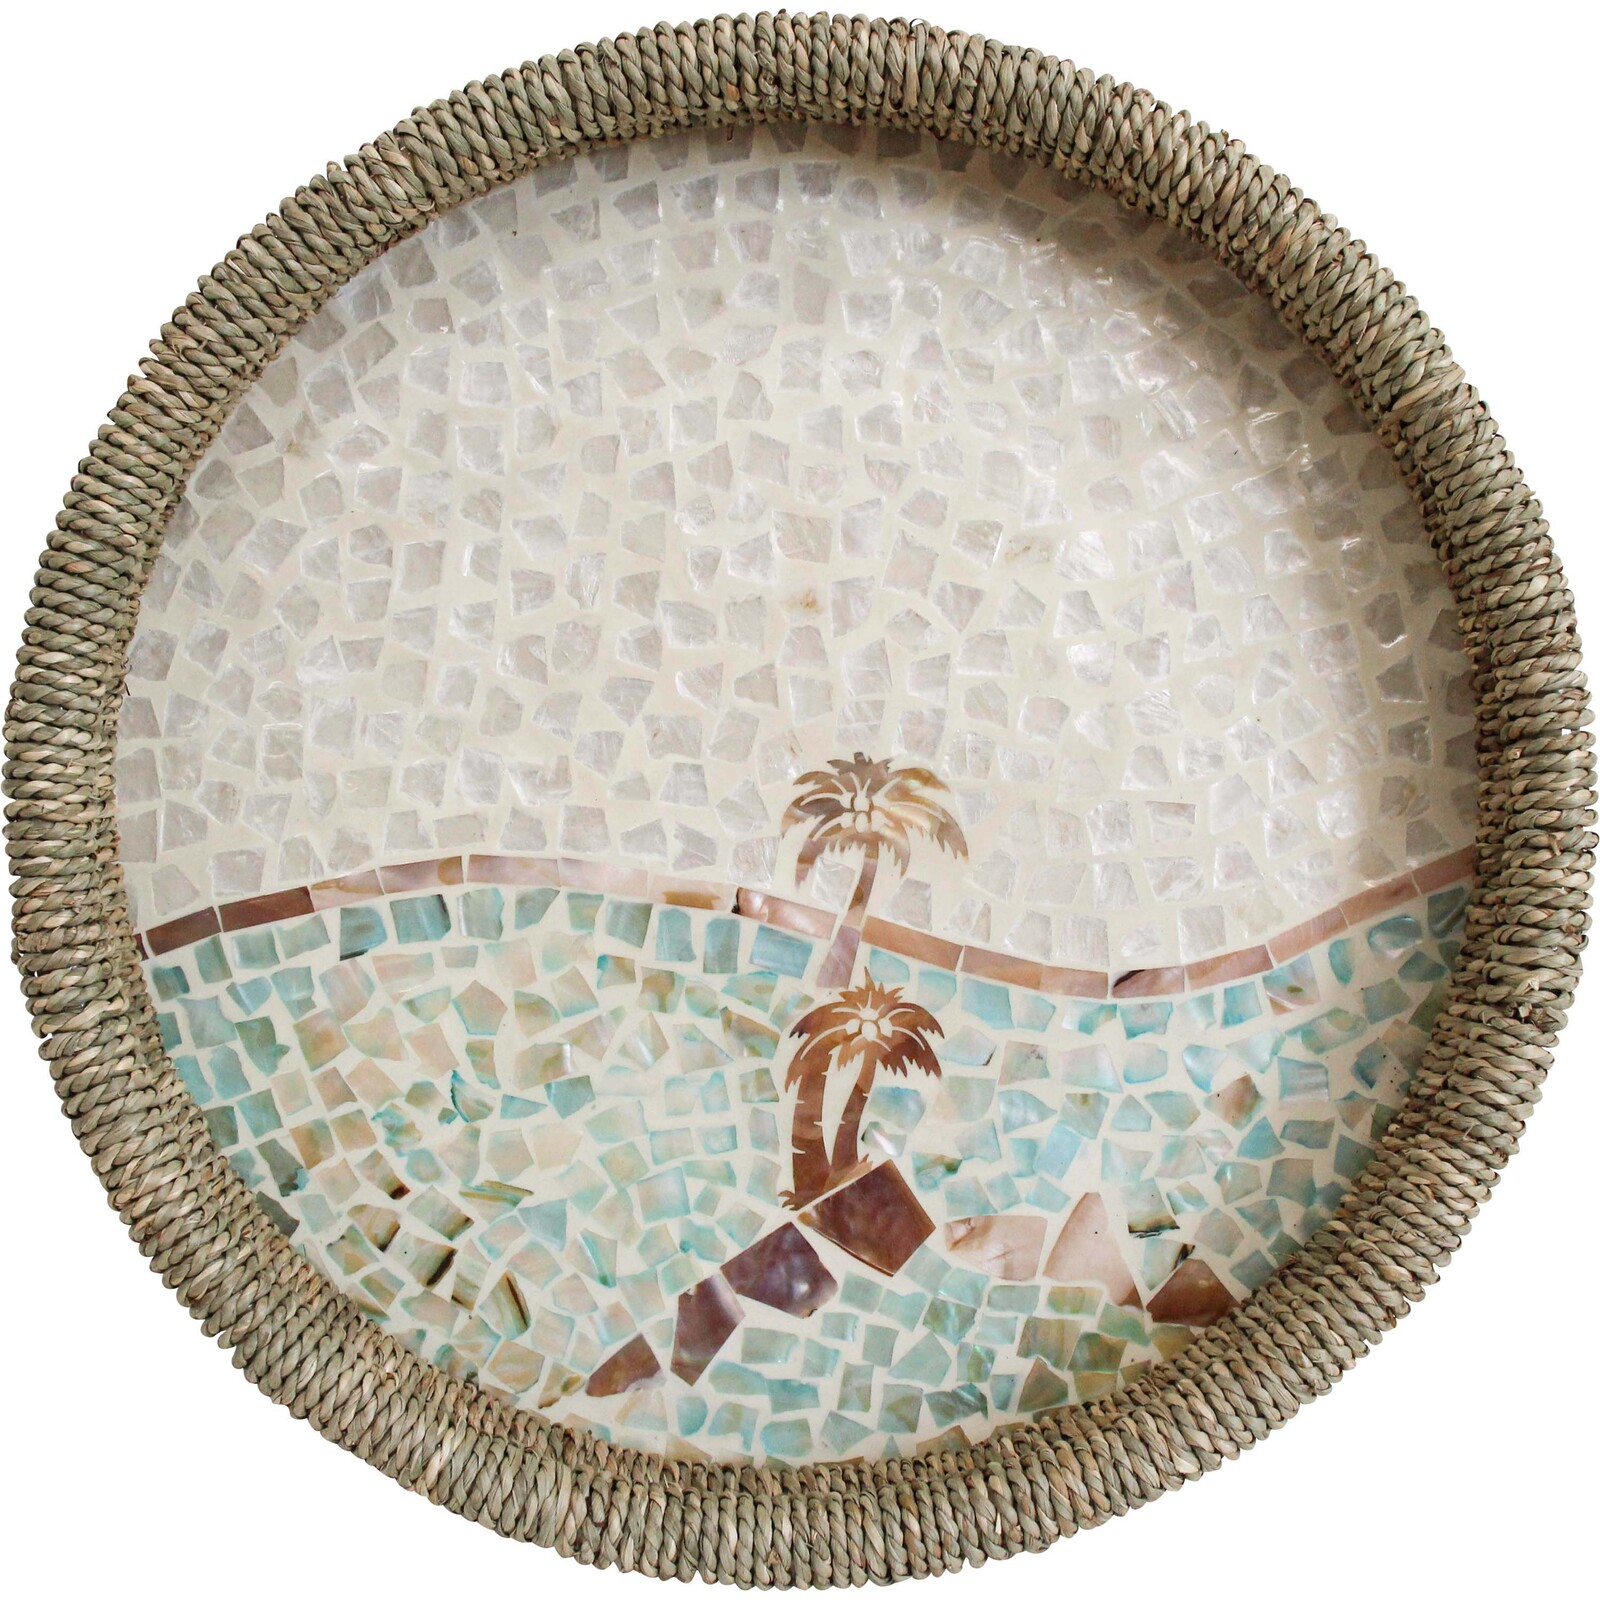 Tray Palm Shell Seagrass